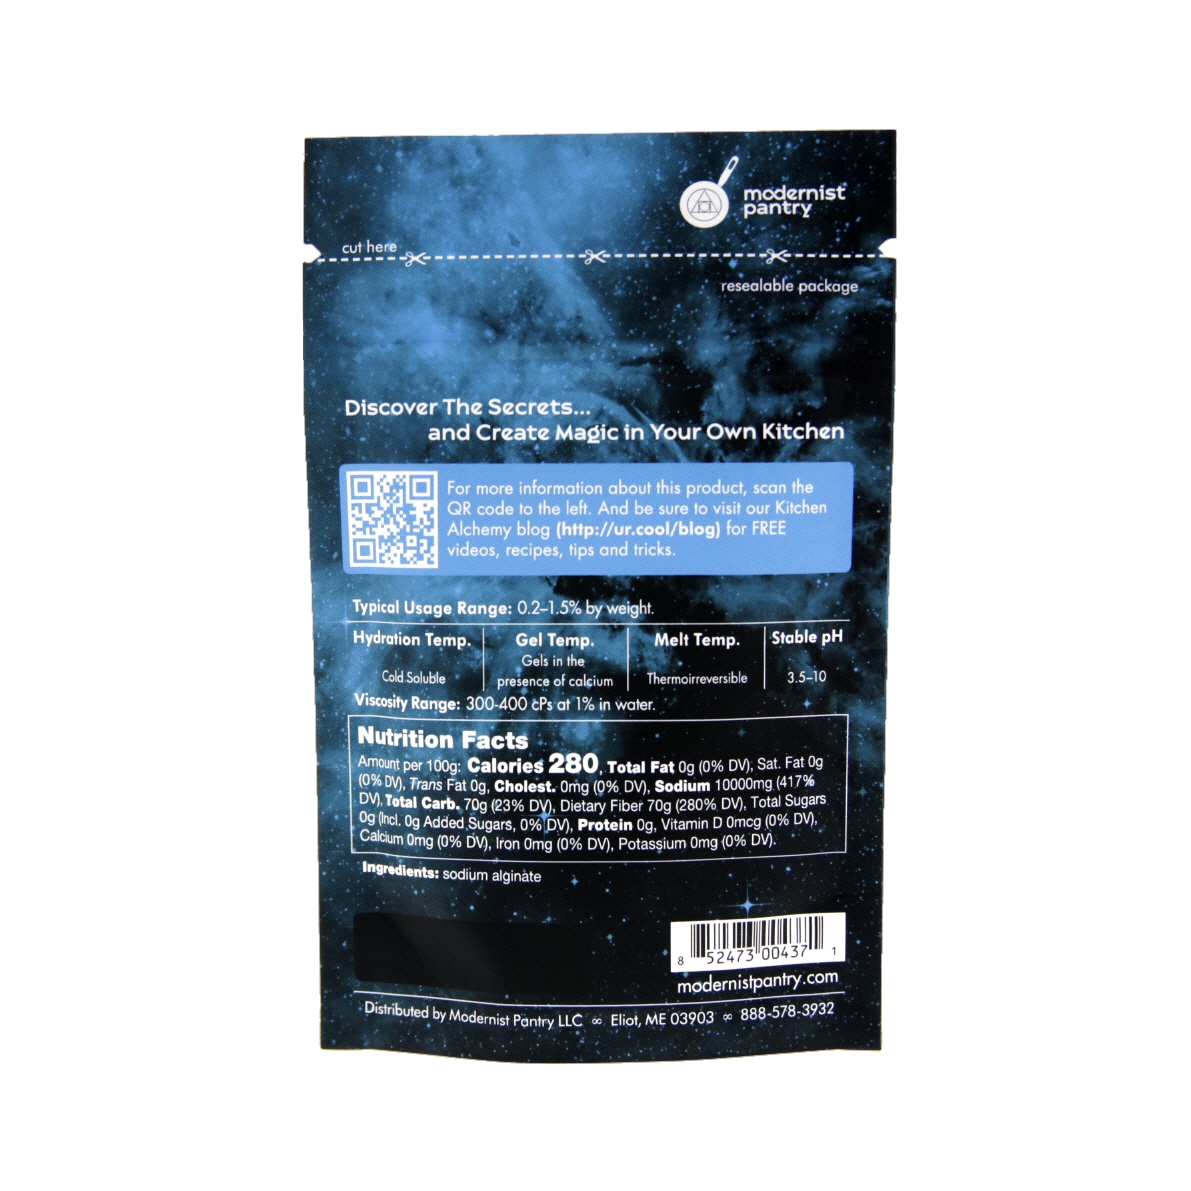 Sodium Alginate, 25g - The Curated Chemical Collection: :  Industrial & Scientific